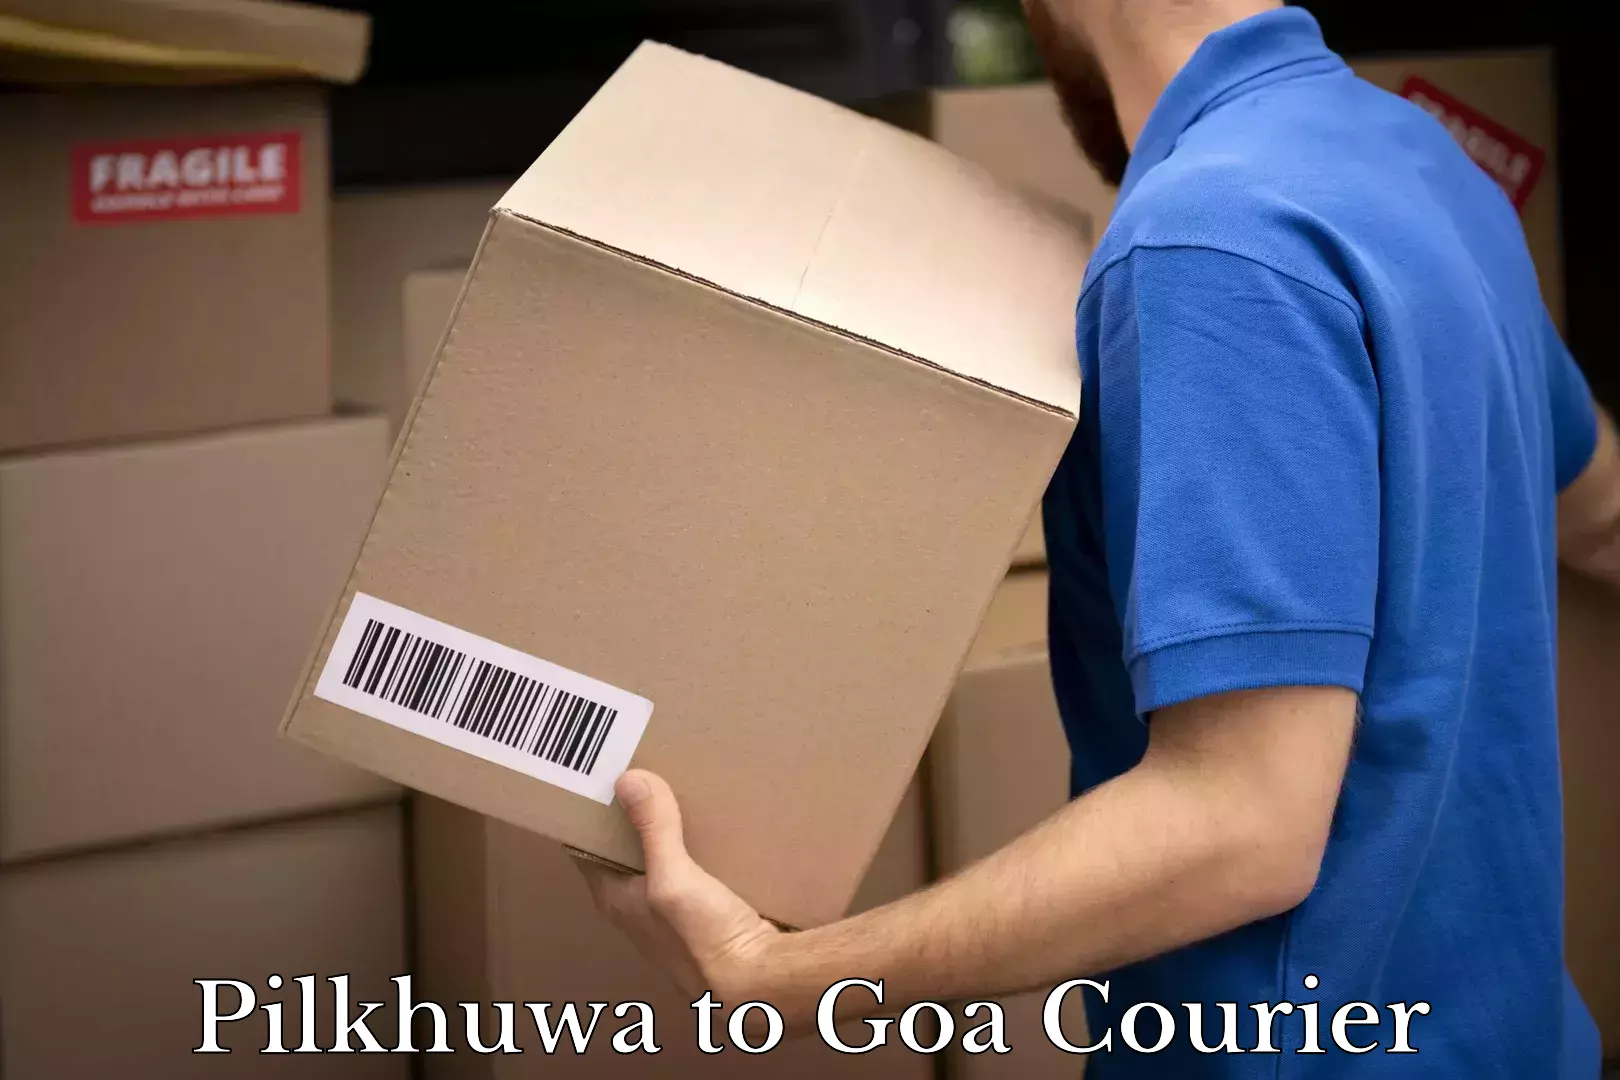 Express delivery capabilities Pilkhuwa to Goa